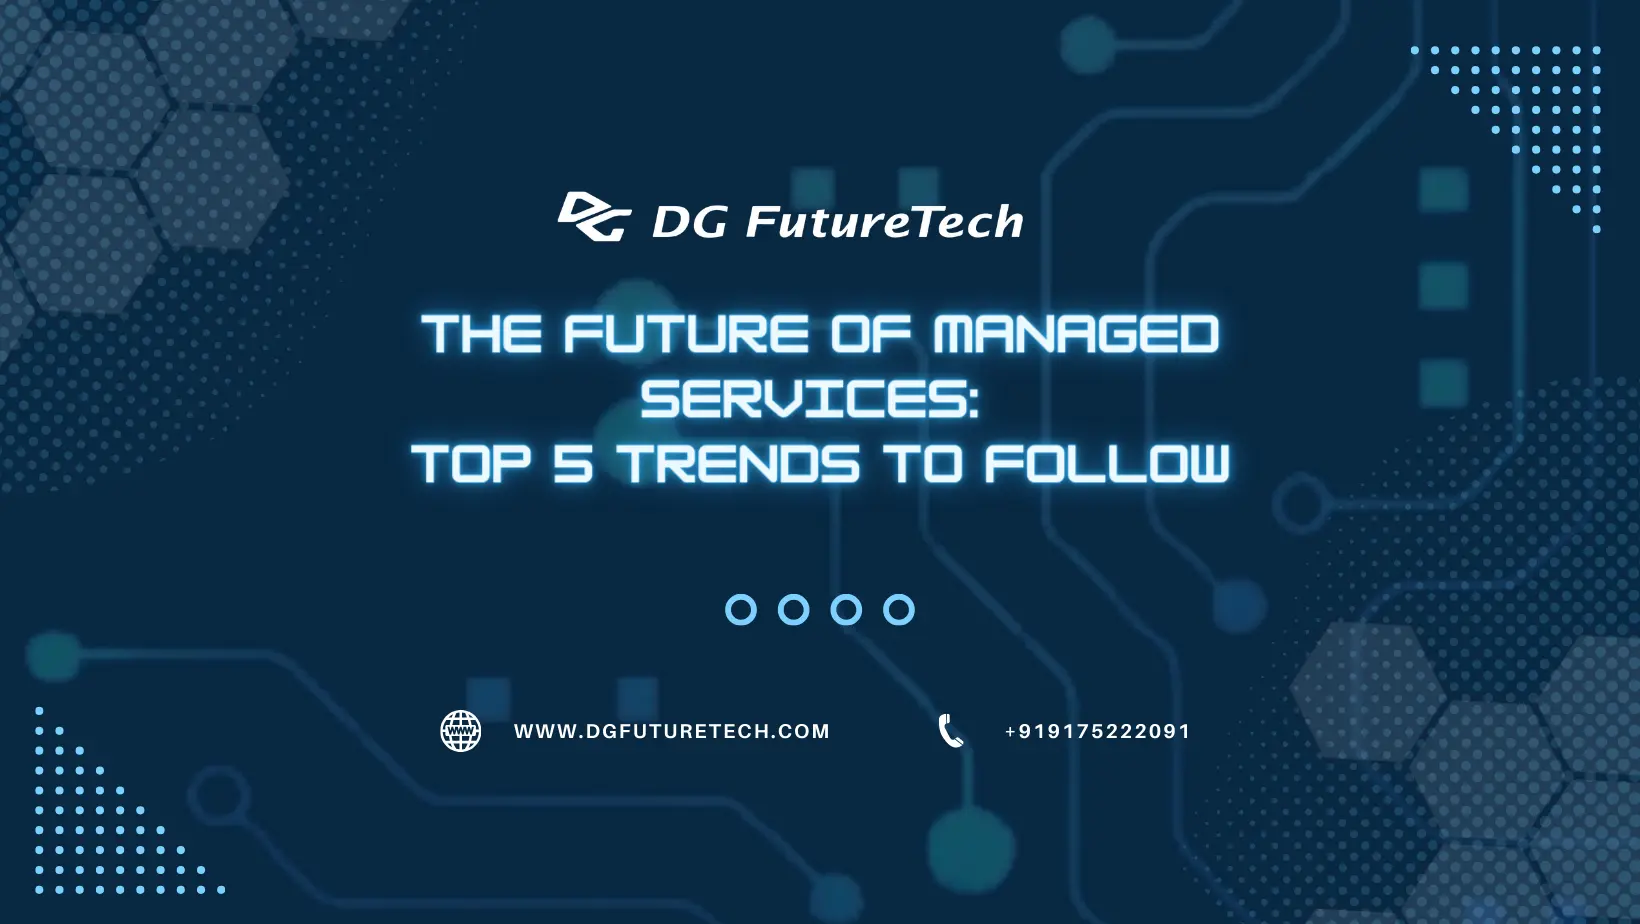 The future of managed services: top 5 trends to follow